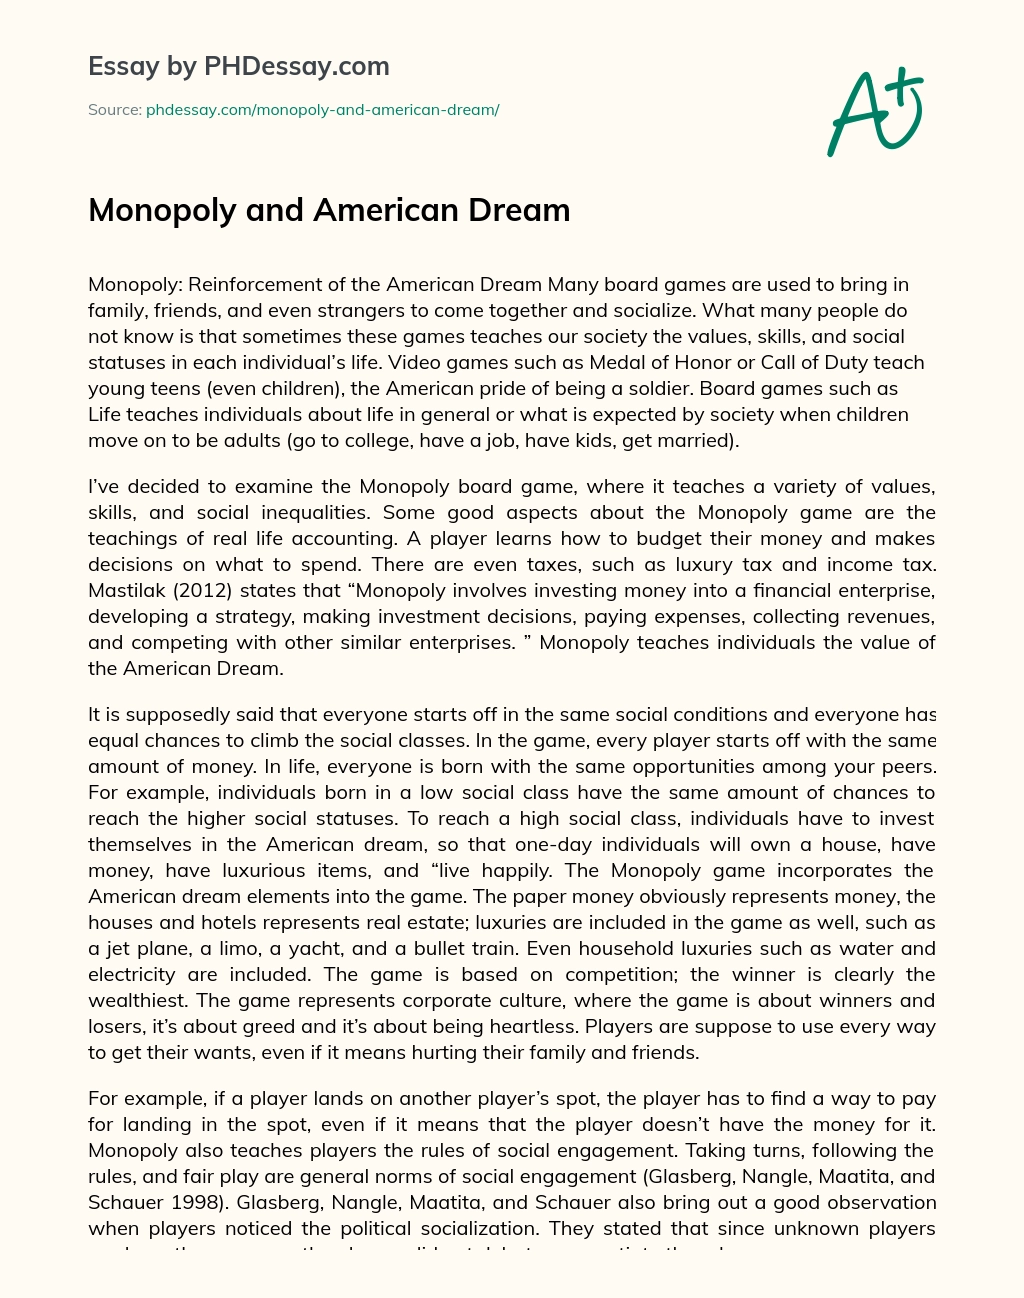 Monopoly and American Dream essay